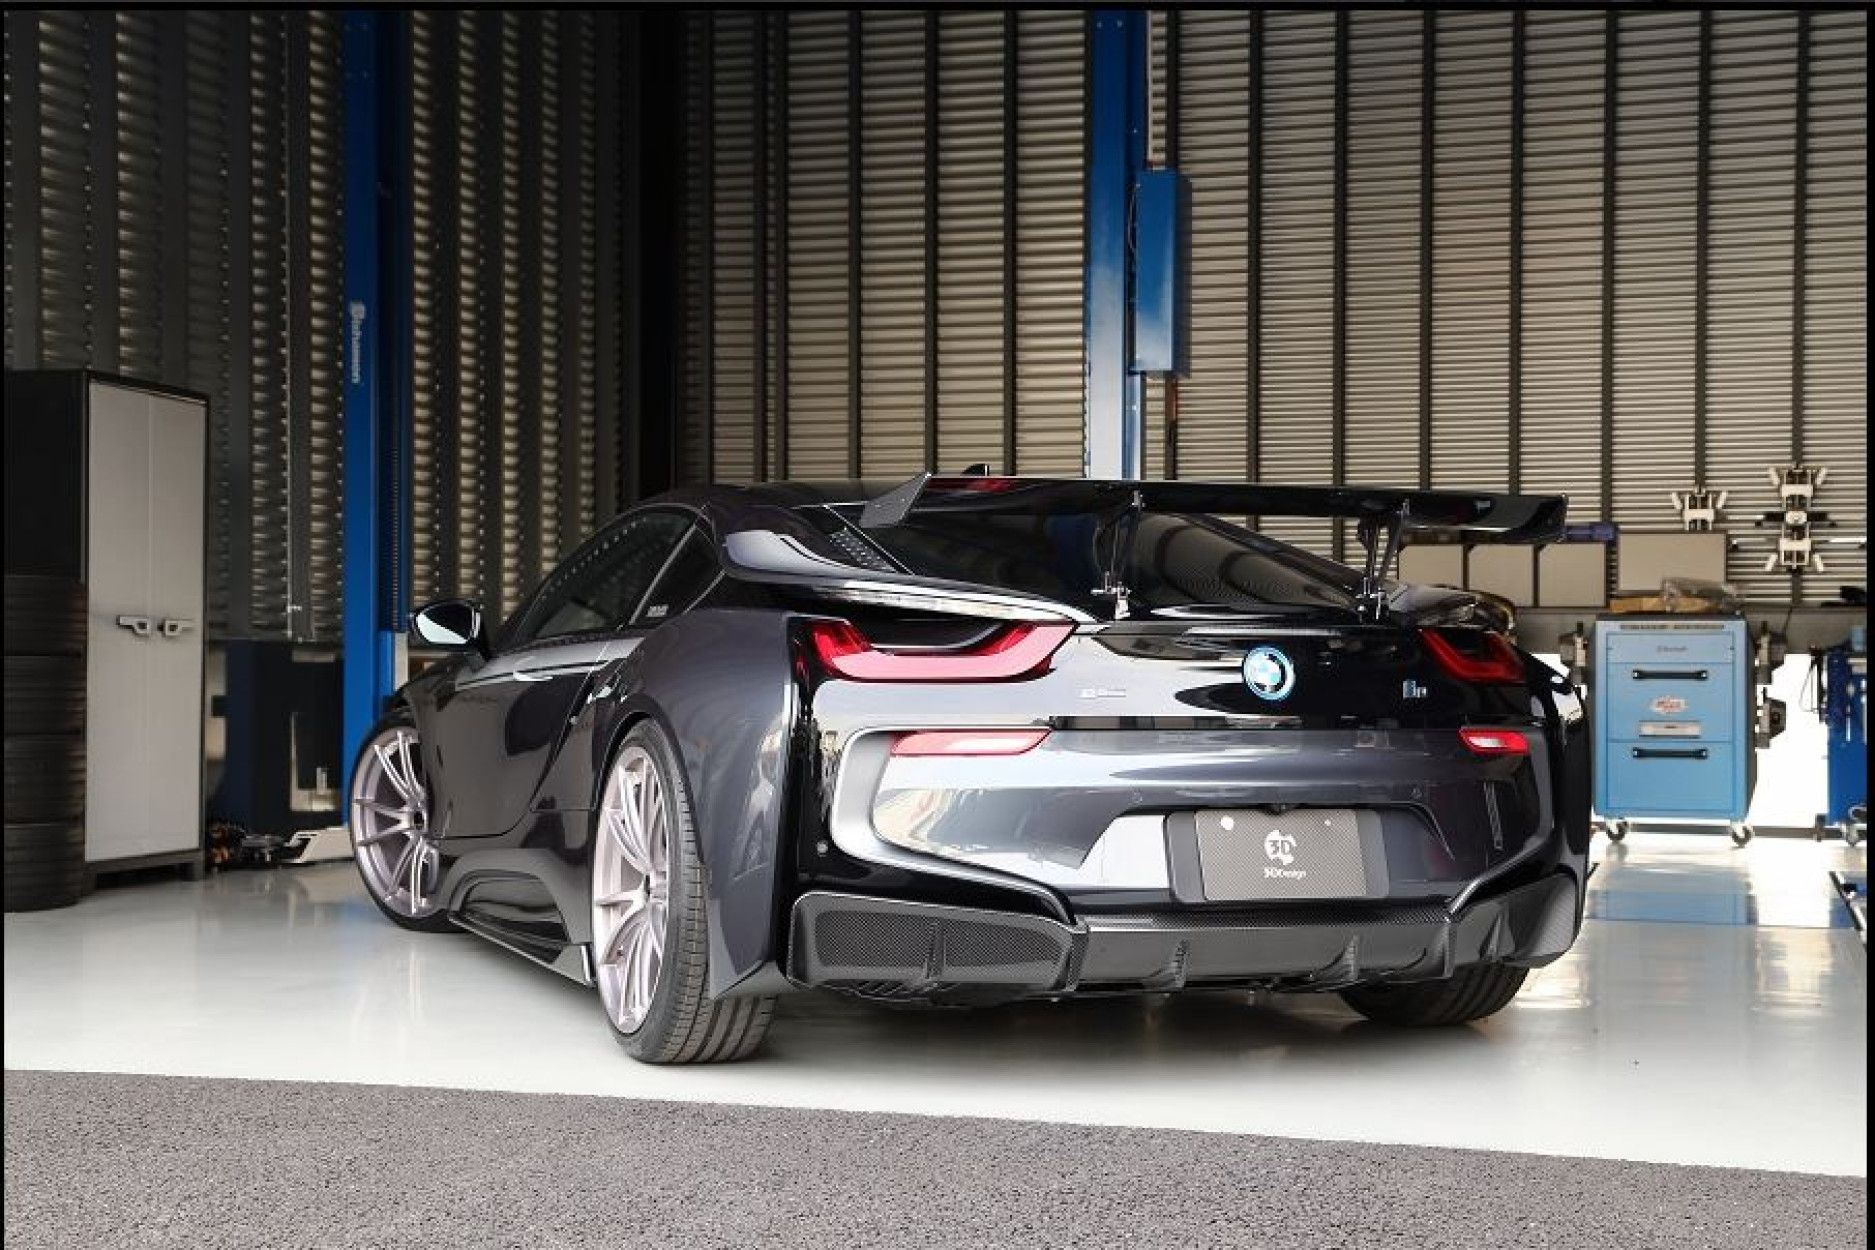 3ddesign Carbon Diffuser For Bmw I8 Buy Online At Cfd